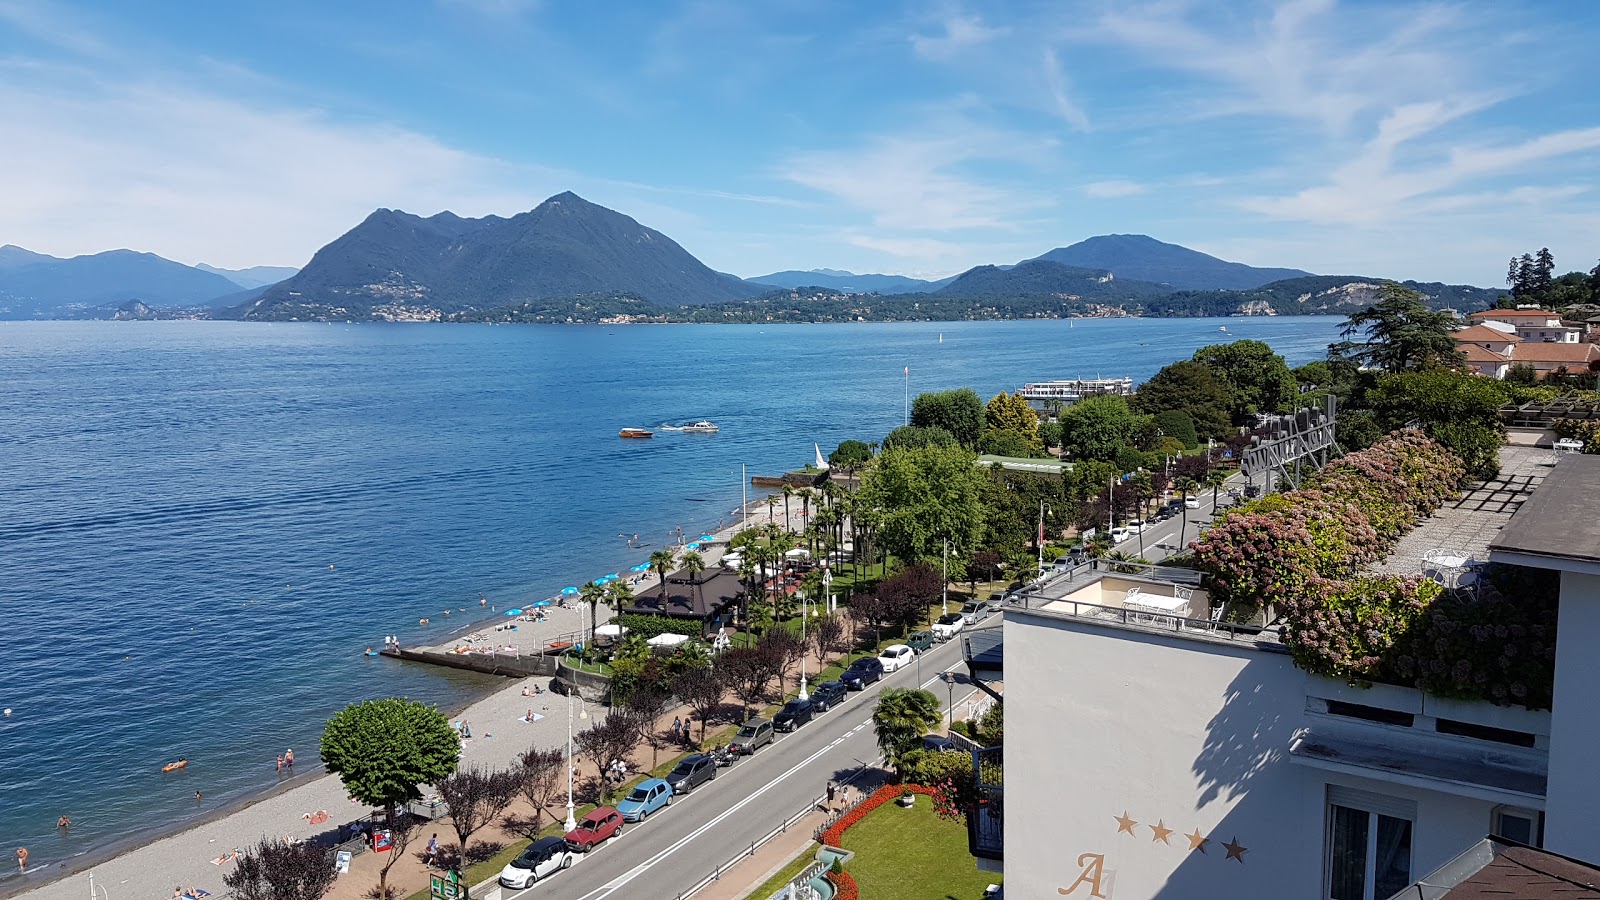 Photo of Spiaggia di Stresa and the settlement